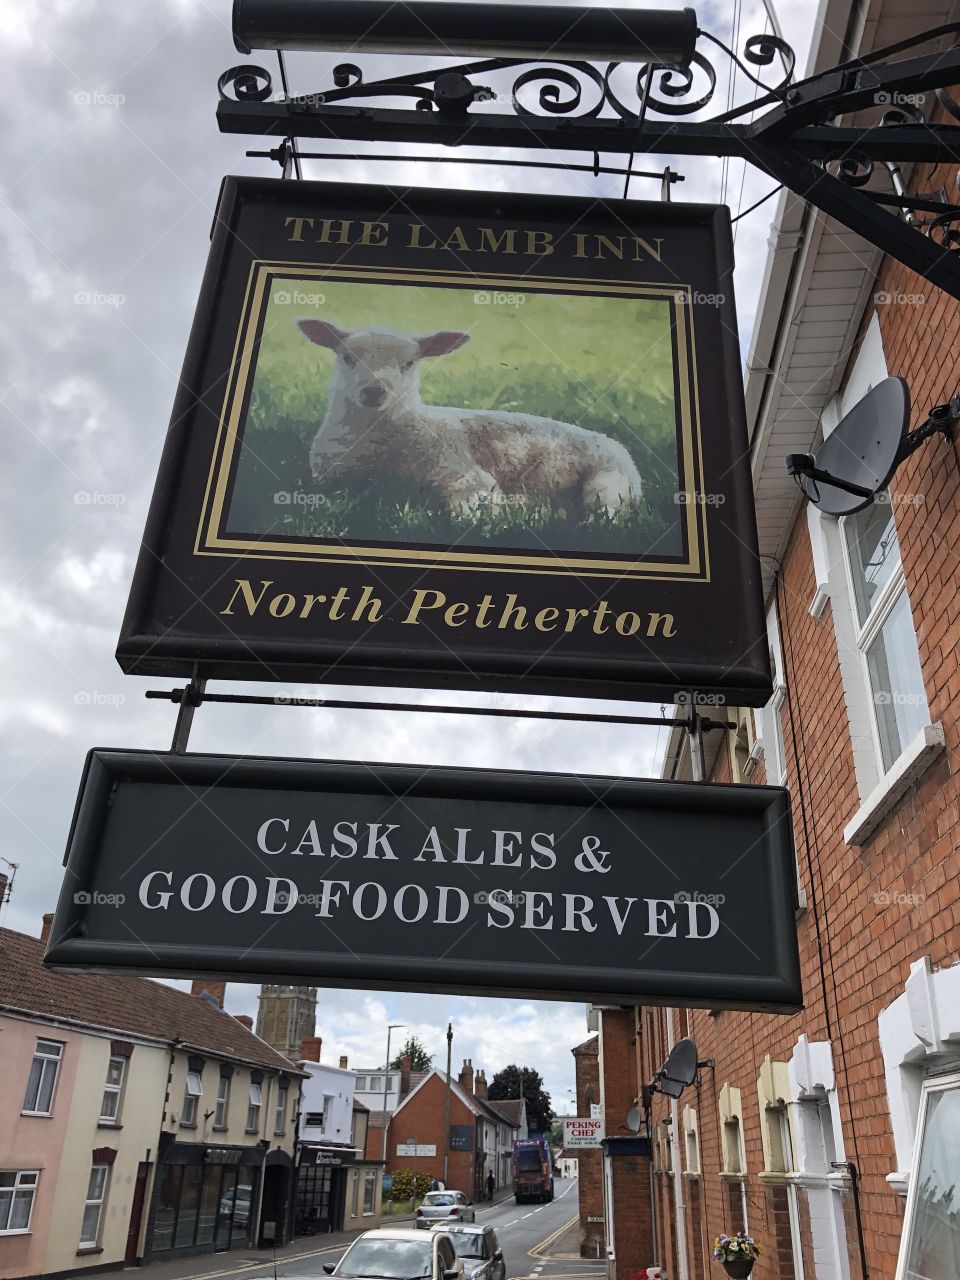 In line with my love of ‘pub signs’ here is one that l found today,that l really love.